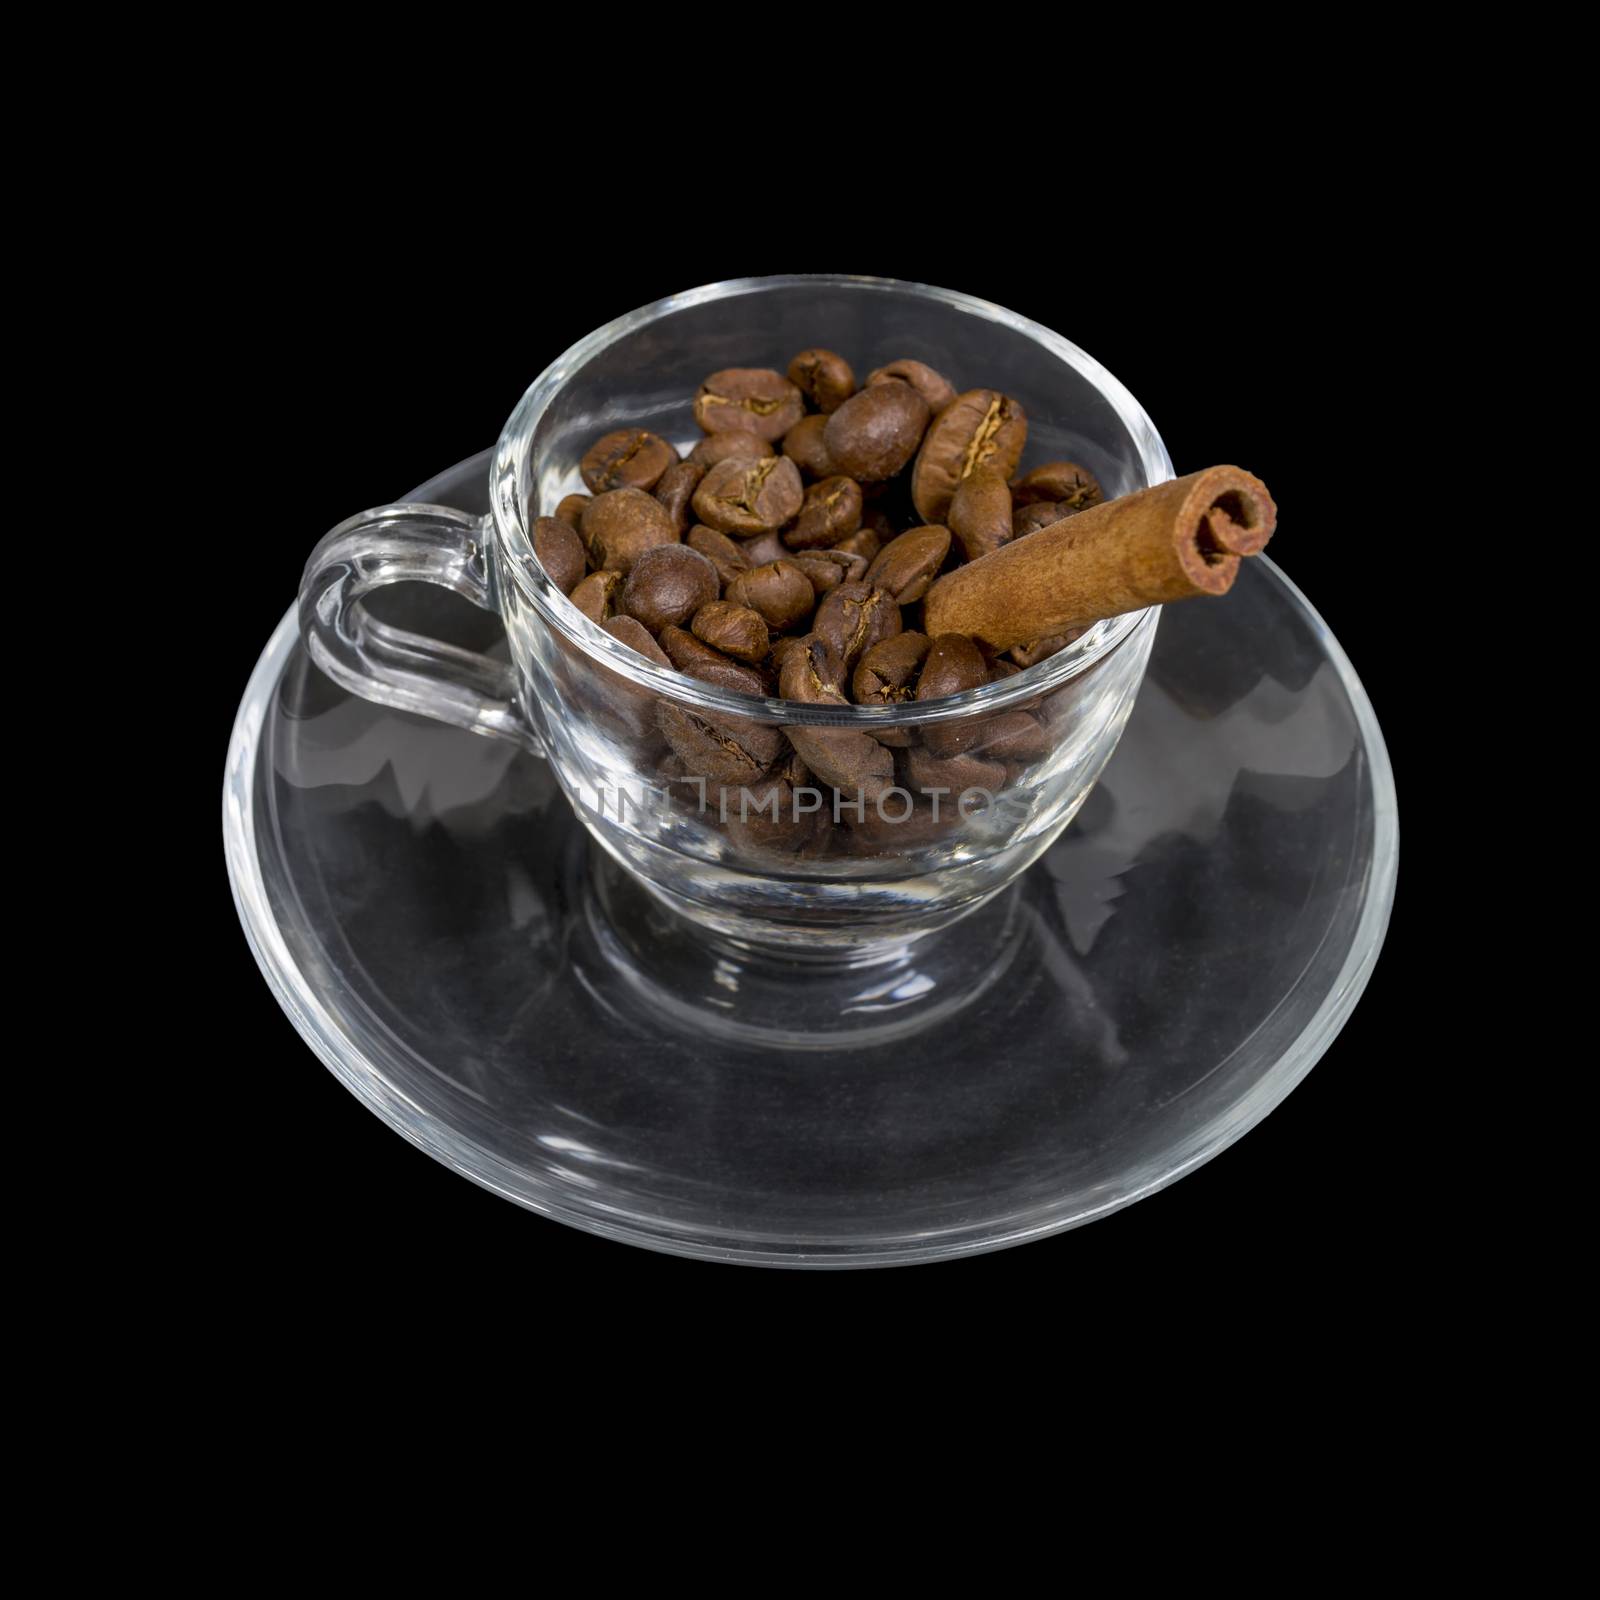 A cup of coffee. Glass cup on a saucer with coffee grains and a vanilla tube. Isolated on a black background.